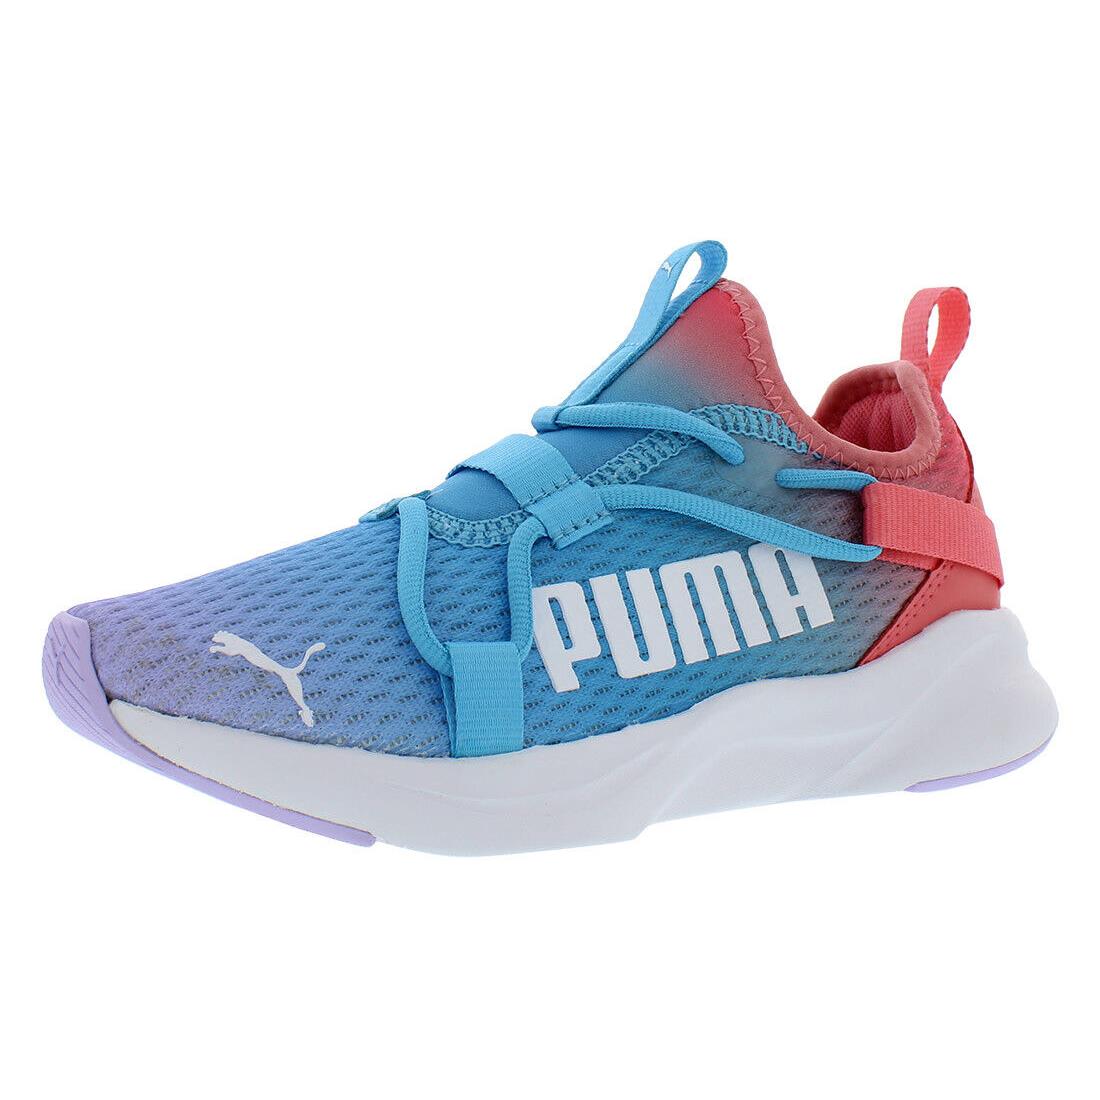 Puma Softride Rift So Ombre Girls Shoes Size 5.5 Color: Blue/pink - Blue/Pink, Main: Blue